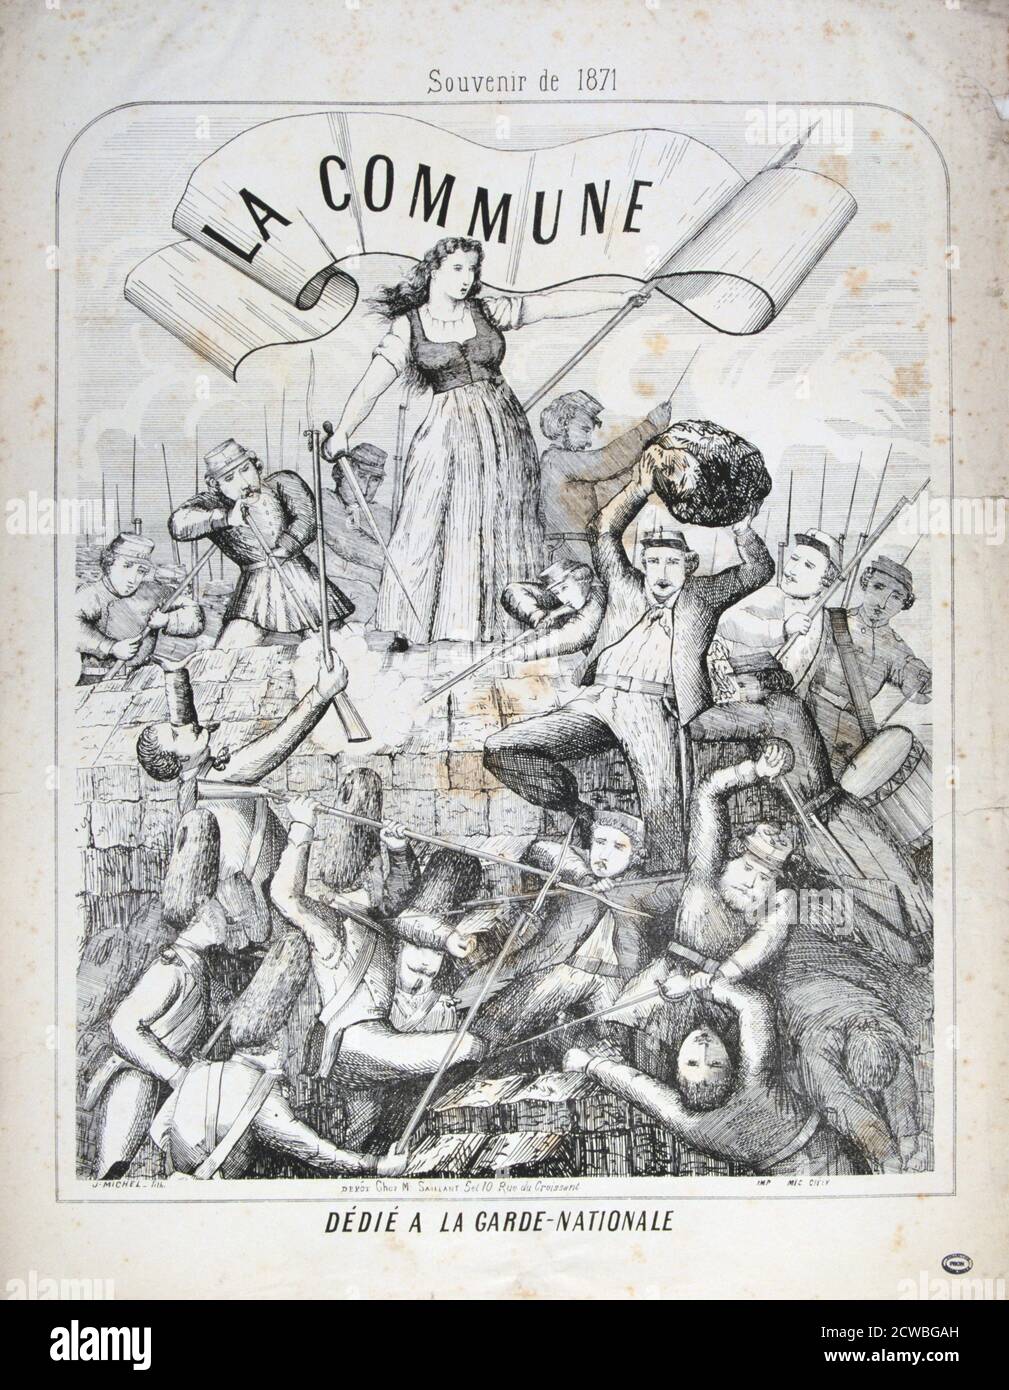 Garde Nationale, Paris Commune, 1871. Cartoon dedicated to the Garde Nationale, the army recruited from Paris' citizenry to defend the city during the Prussian siege. The Garde were instrumental in the overthrow of the government and establishment of the Paris Commune. From a private collection. Stock Photo